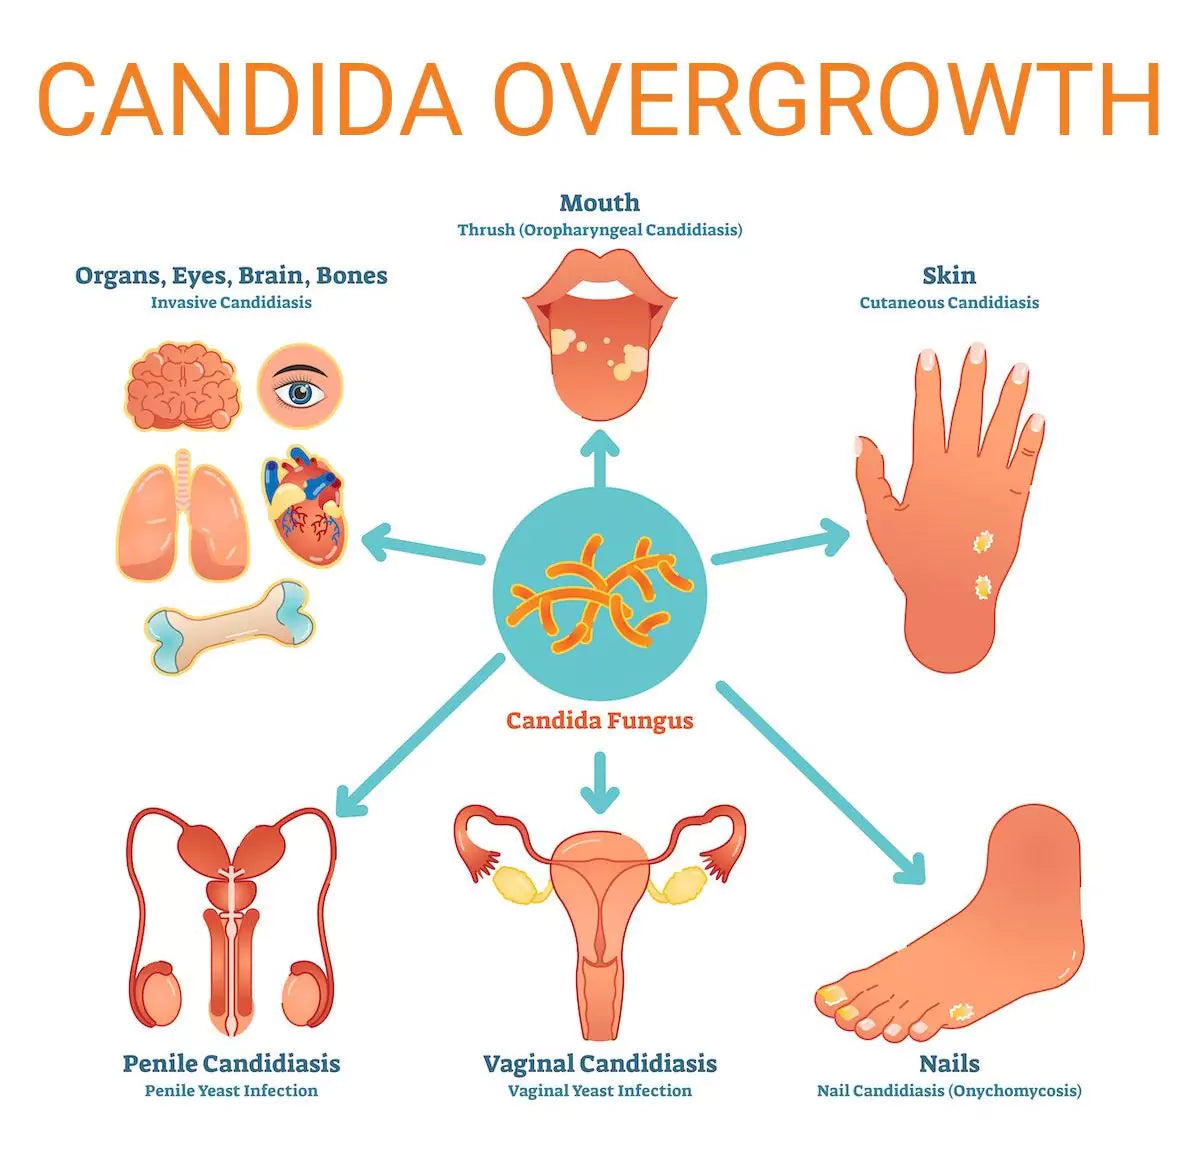 The impact of Candida overgrowth